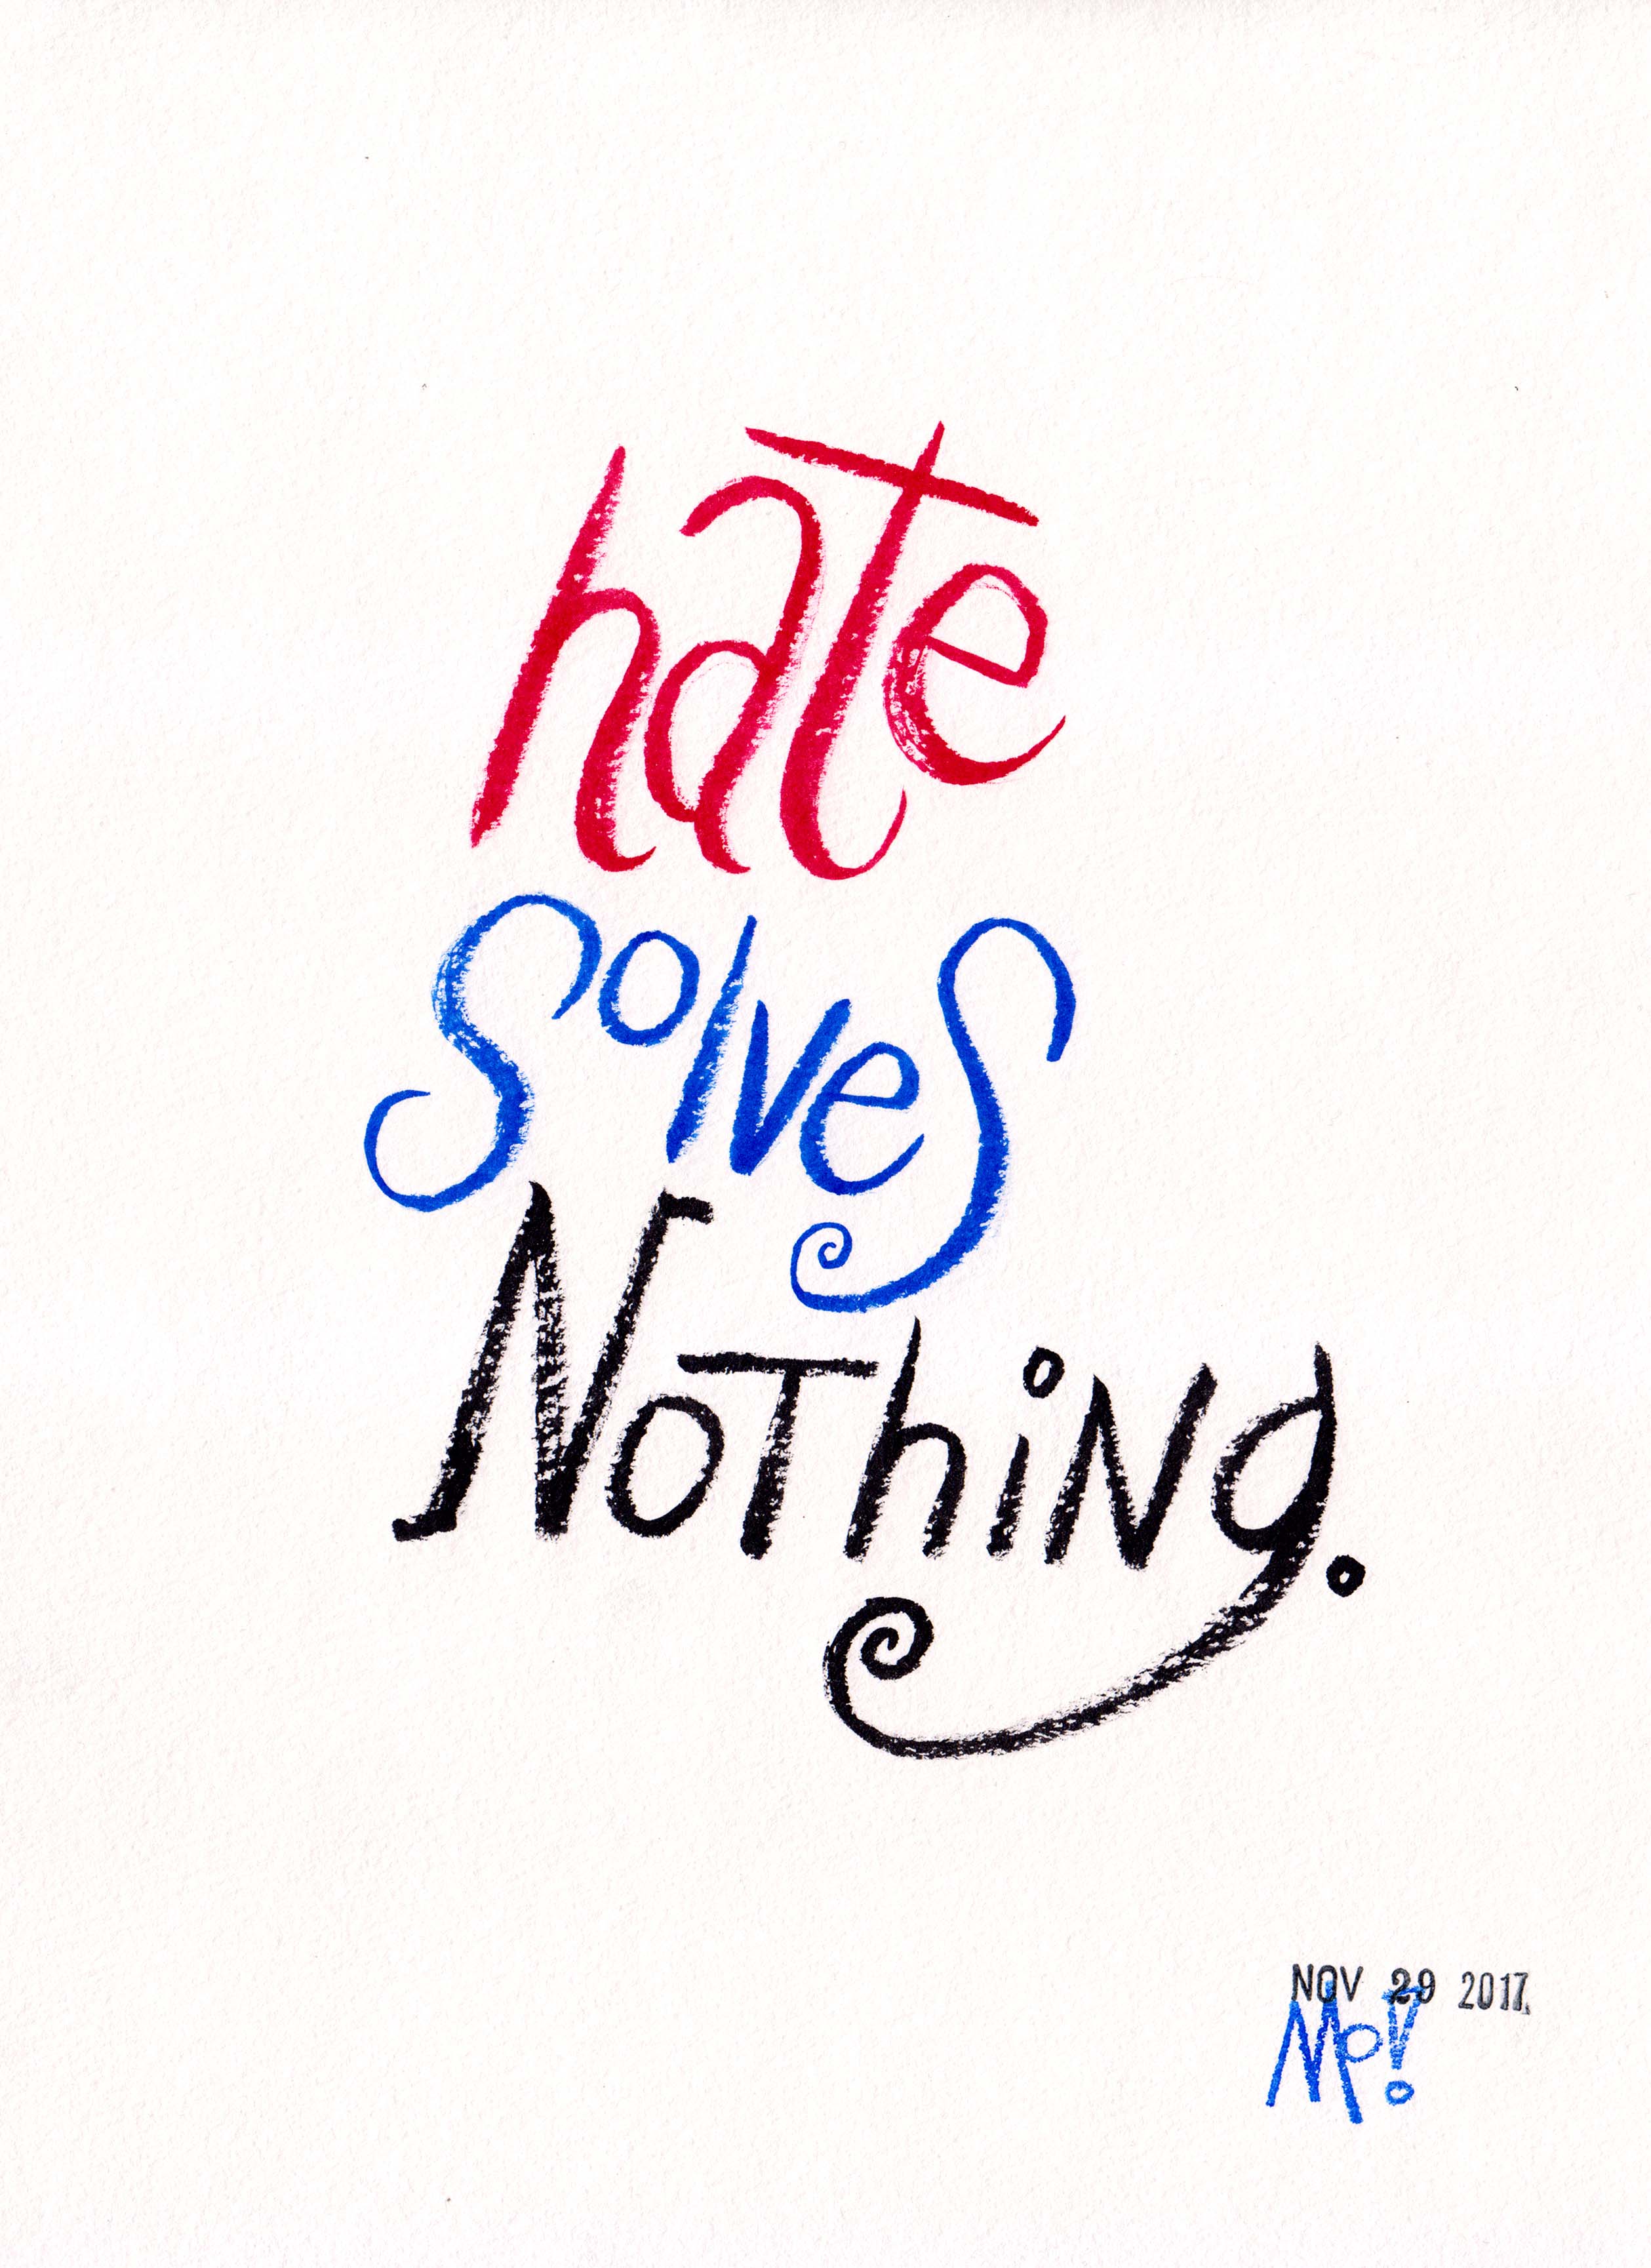 Hate Solves Nothing.